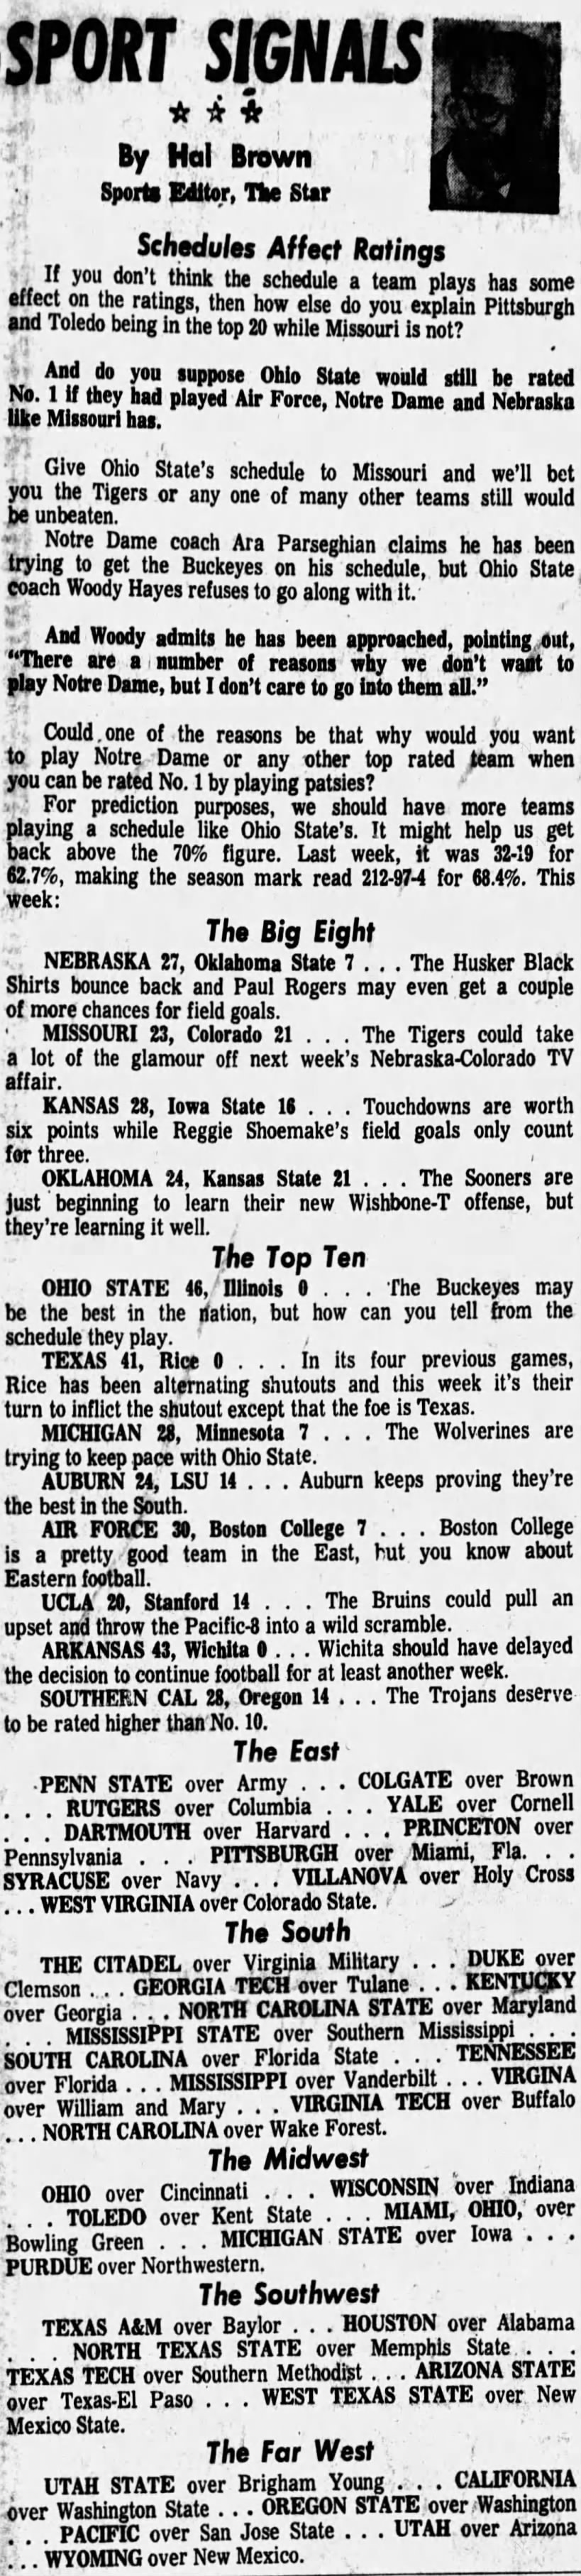 1970.10 Hal Brown, predictions for Okla. State week